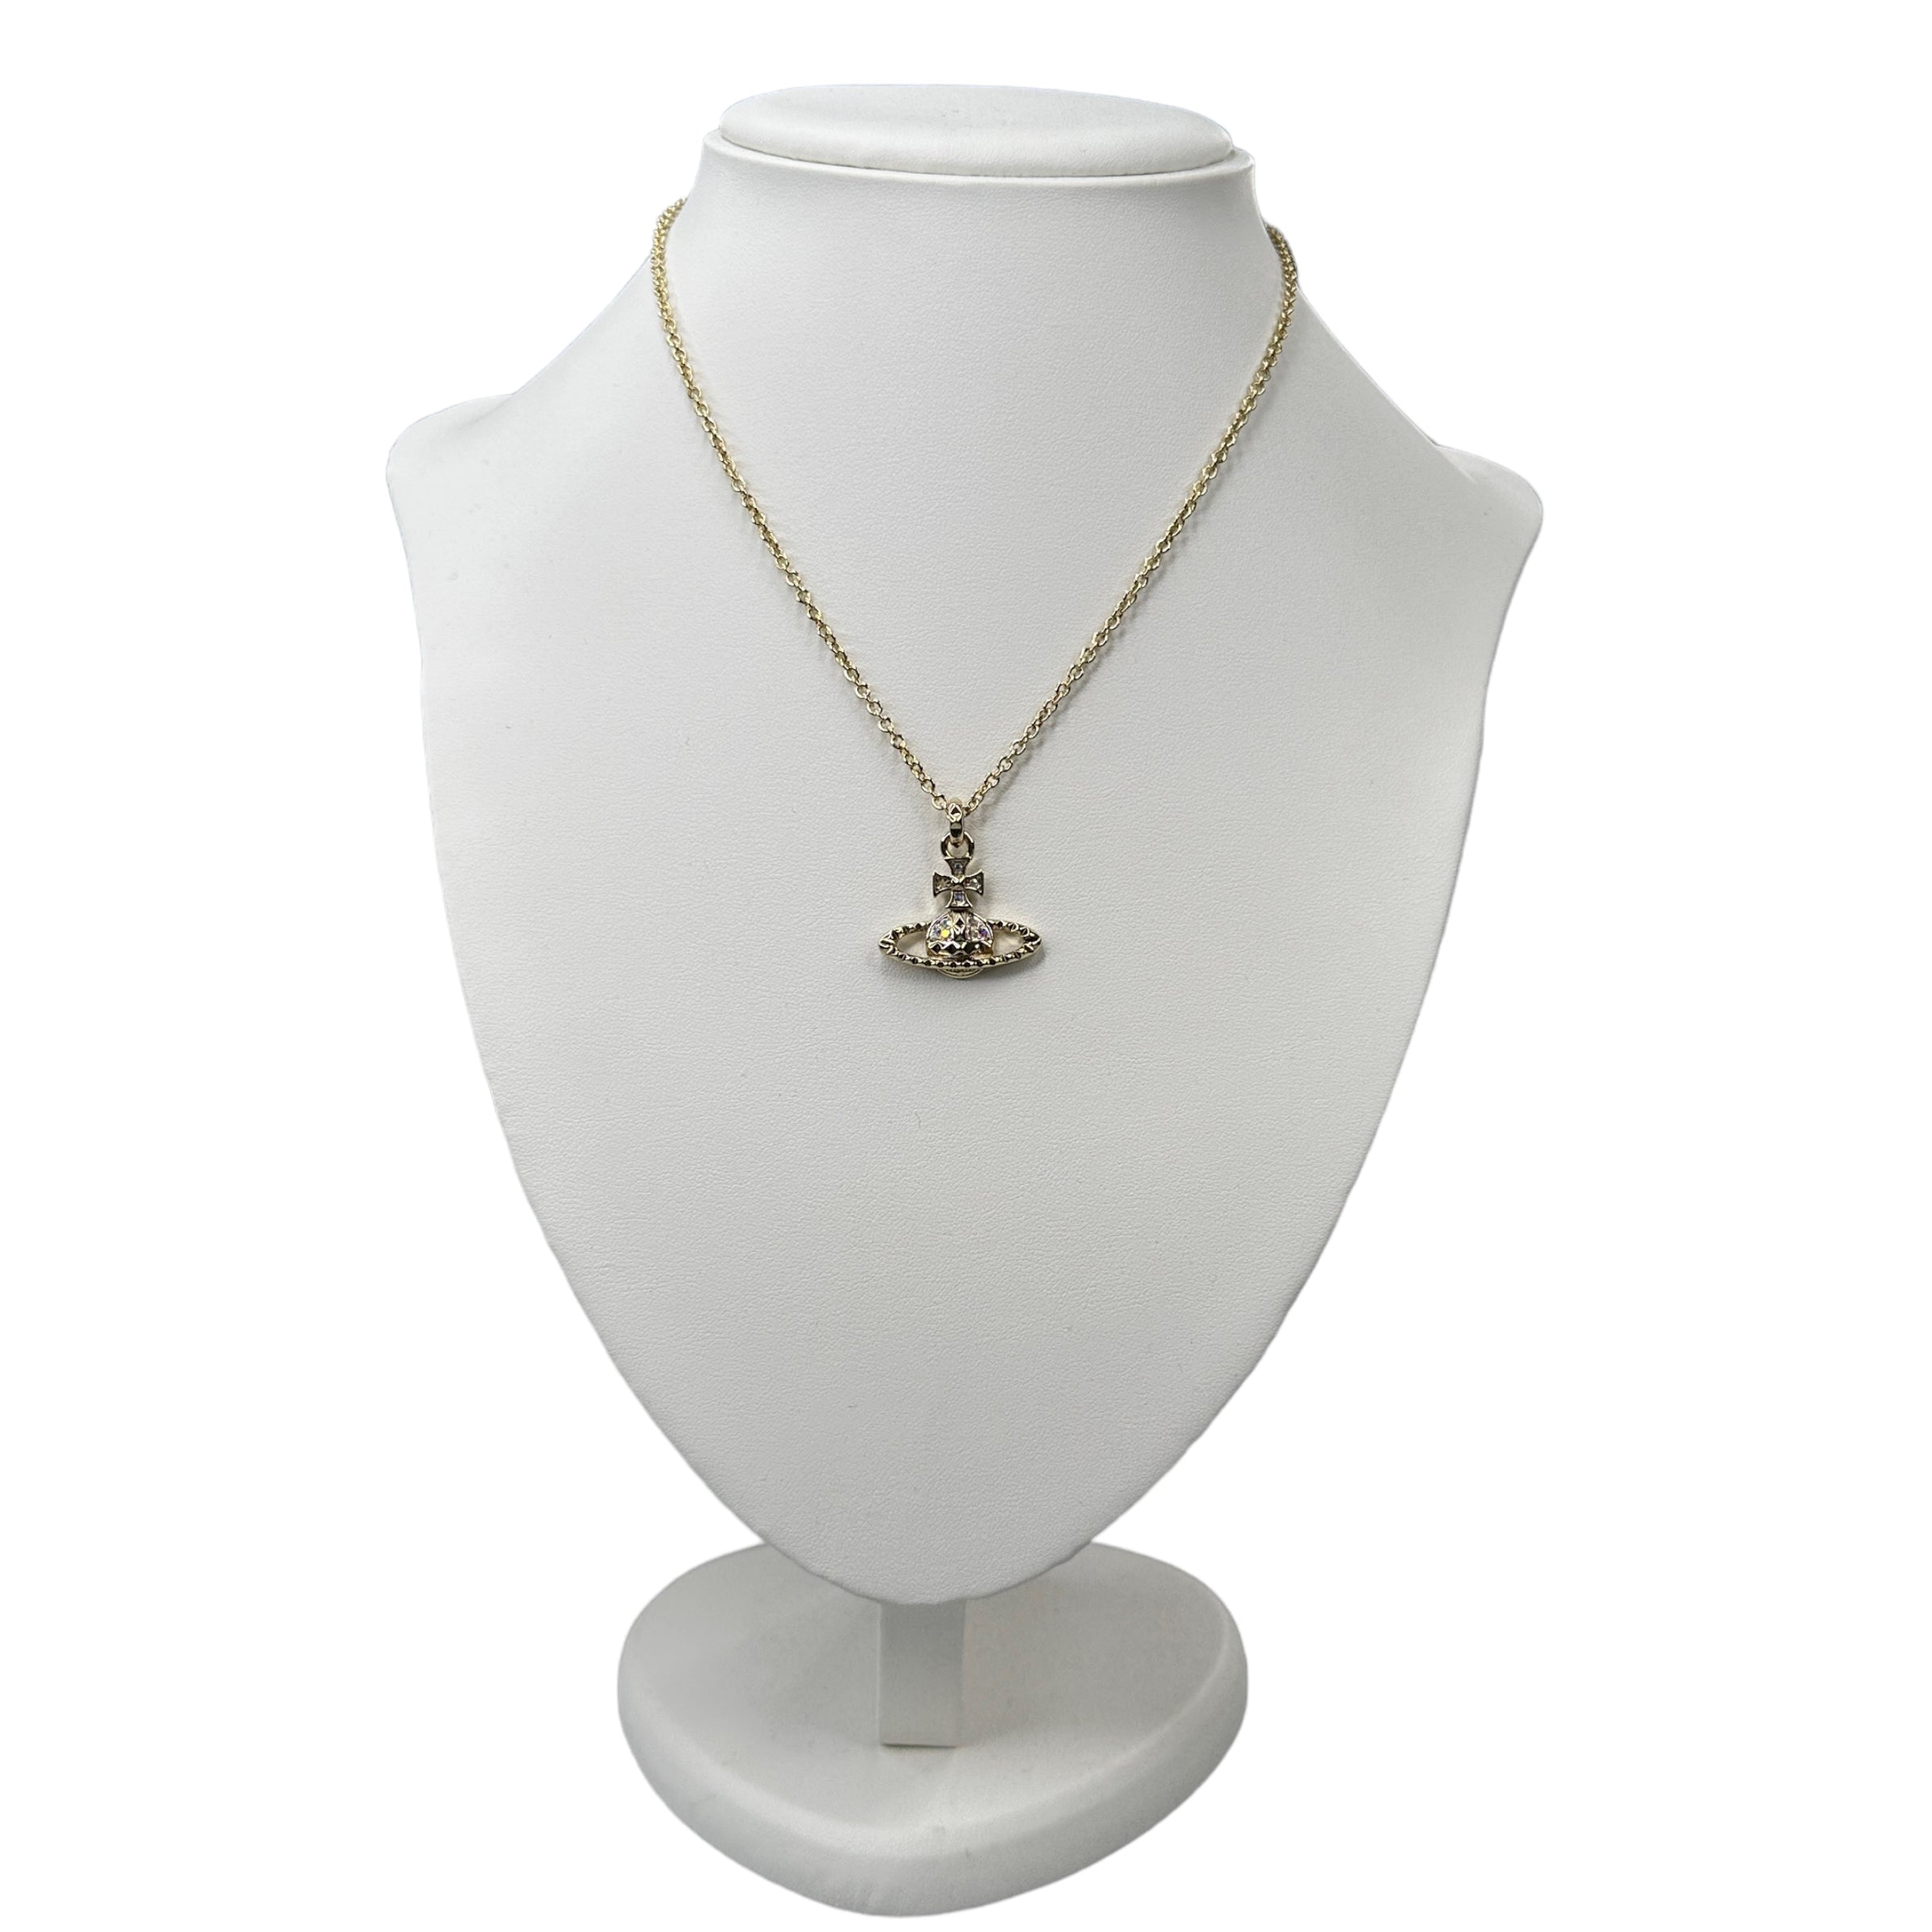 (NEW) VIVIENNE WESTWOOD MAYFAIR BAS RELIEF NECKLACE - GOLD PLATED